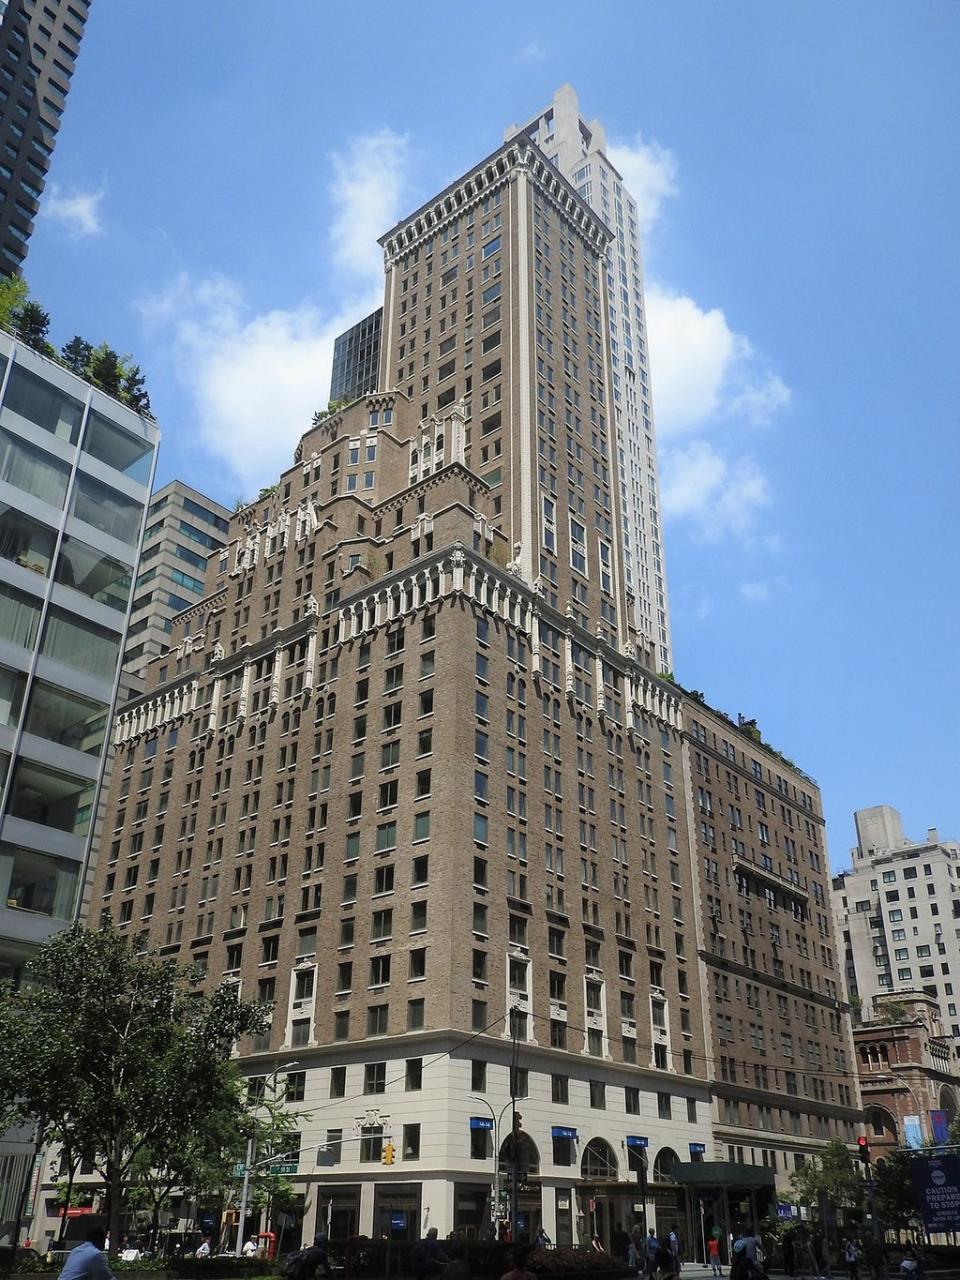 The Trump Park Avenue building in New York City (Wikimedia Commons)